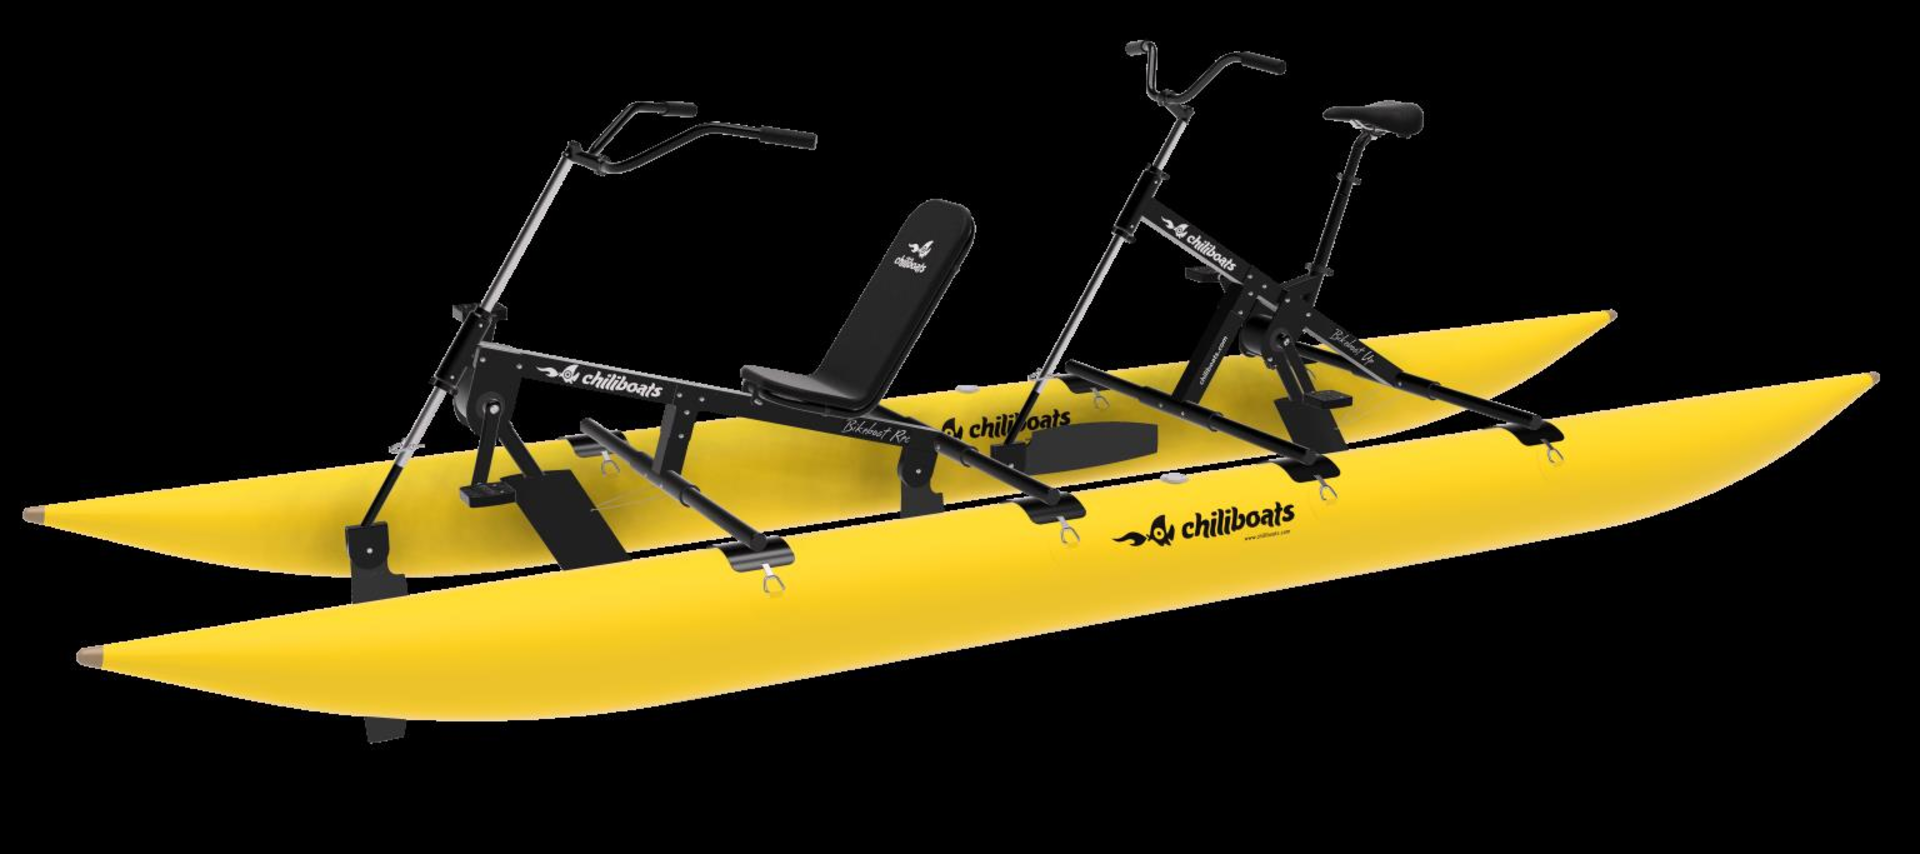 2x Chili bike Boat Recumbent, high performance pedlos with a set of Tandem pontoons so they can be - Image 3 of 3